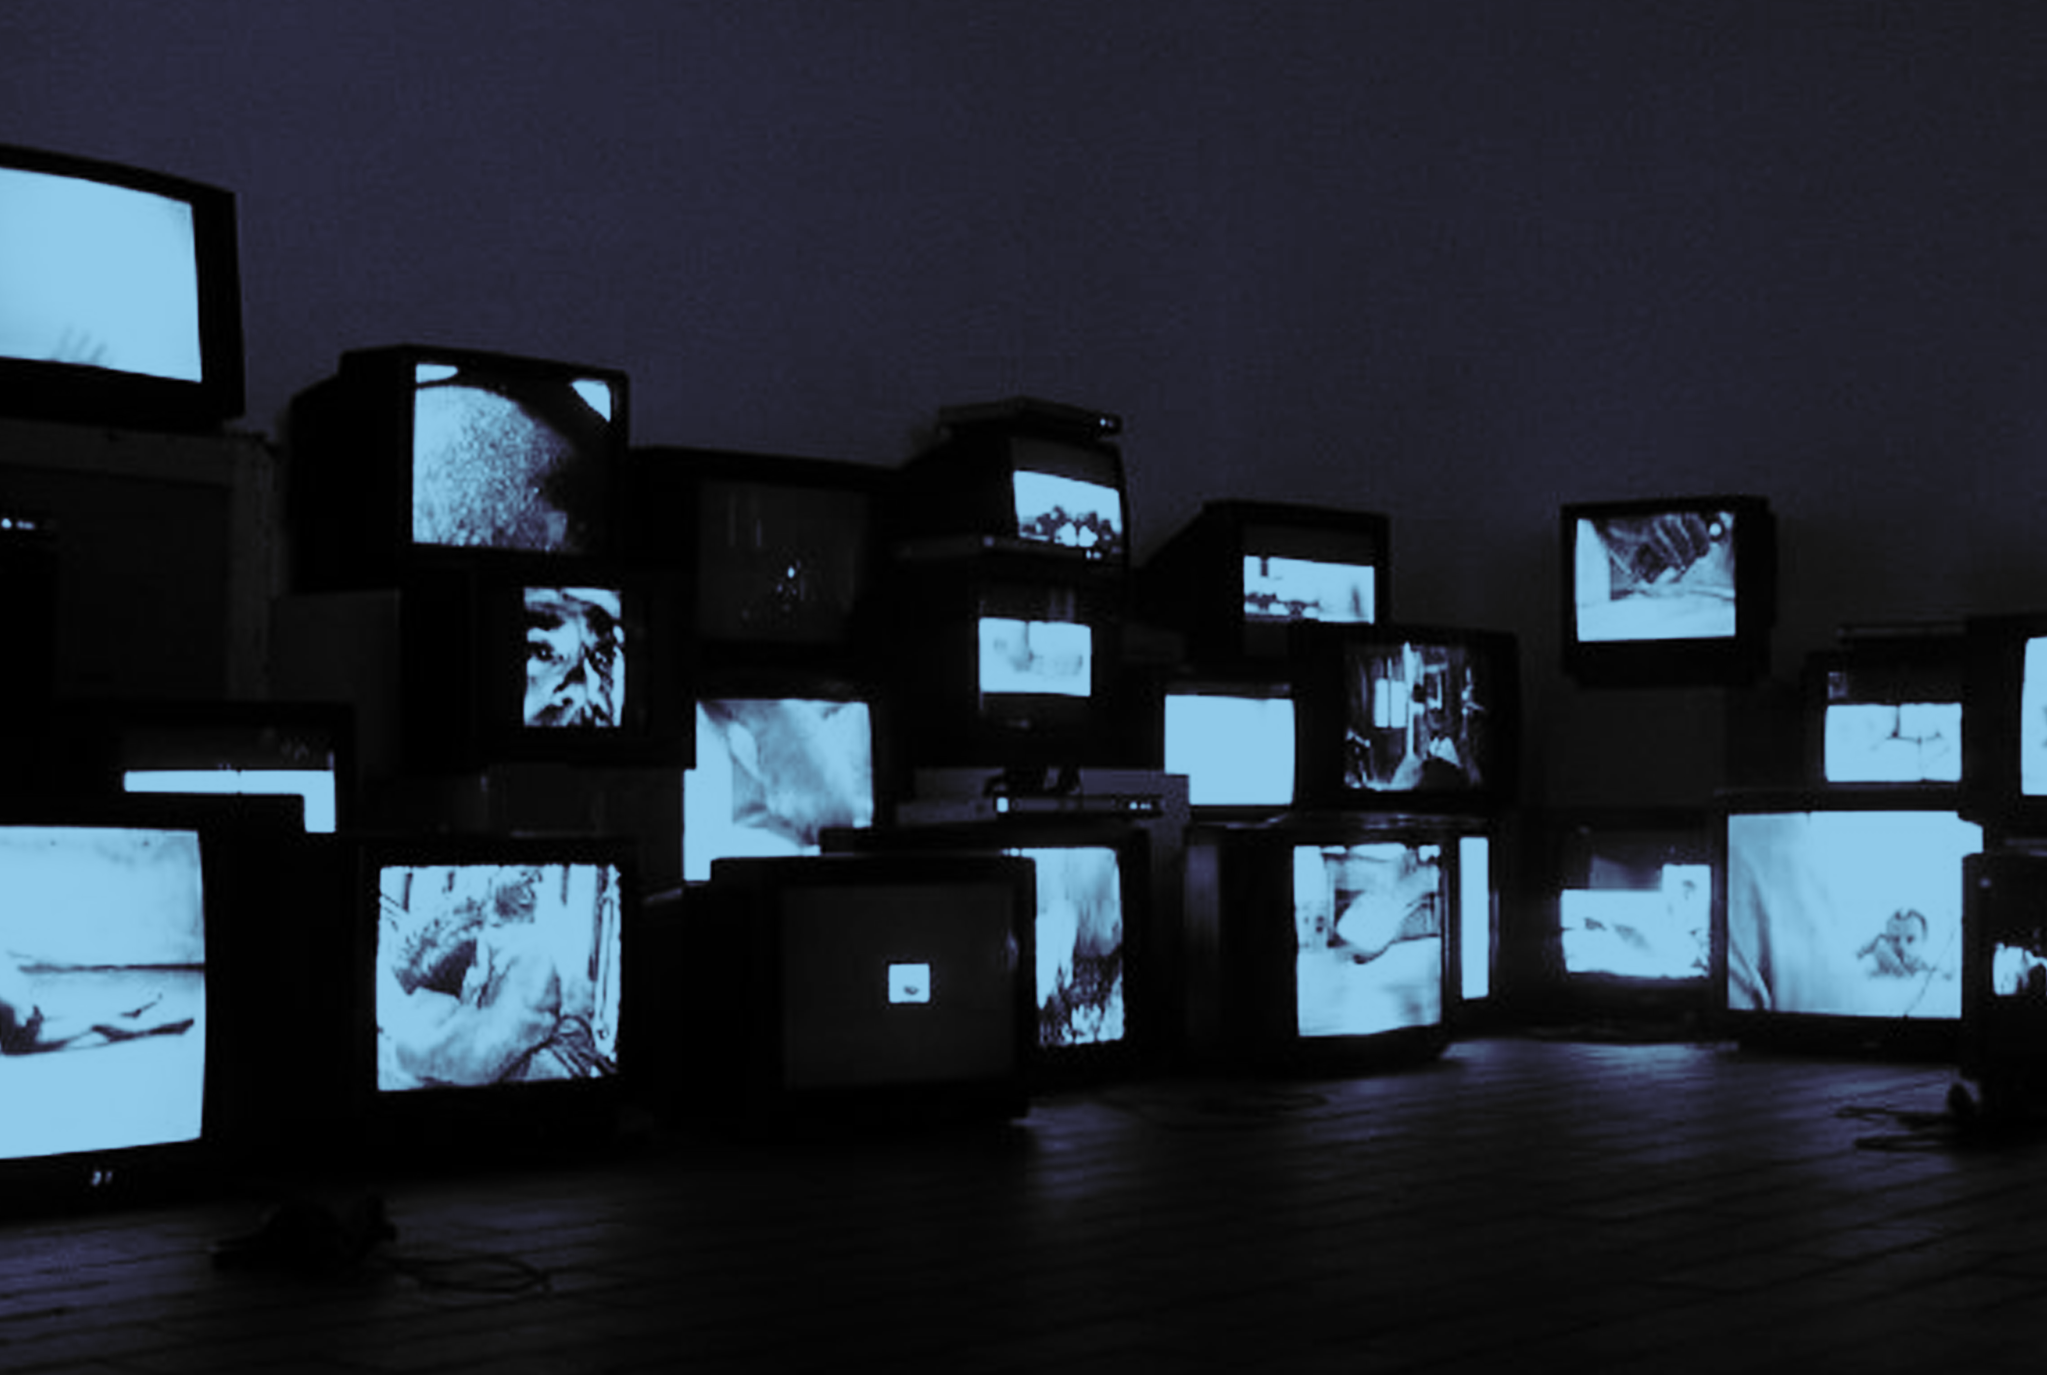 A collection of televisions screens in a dark room